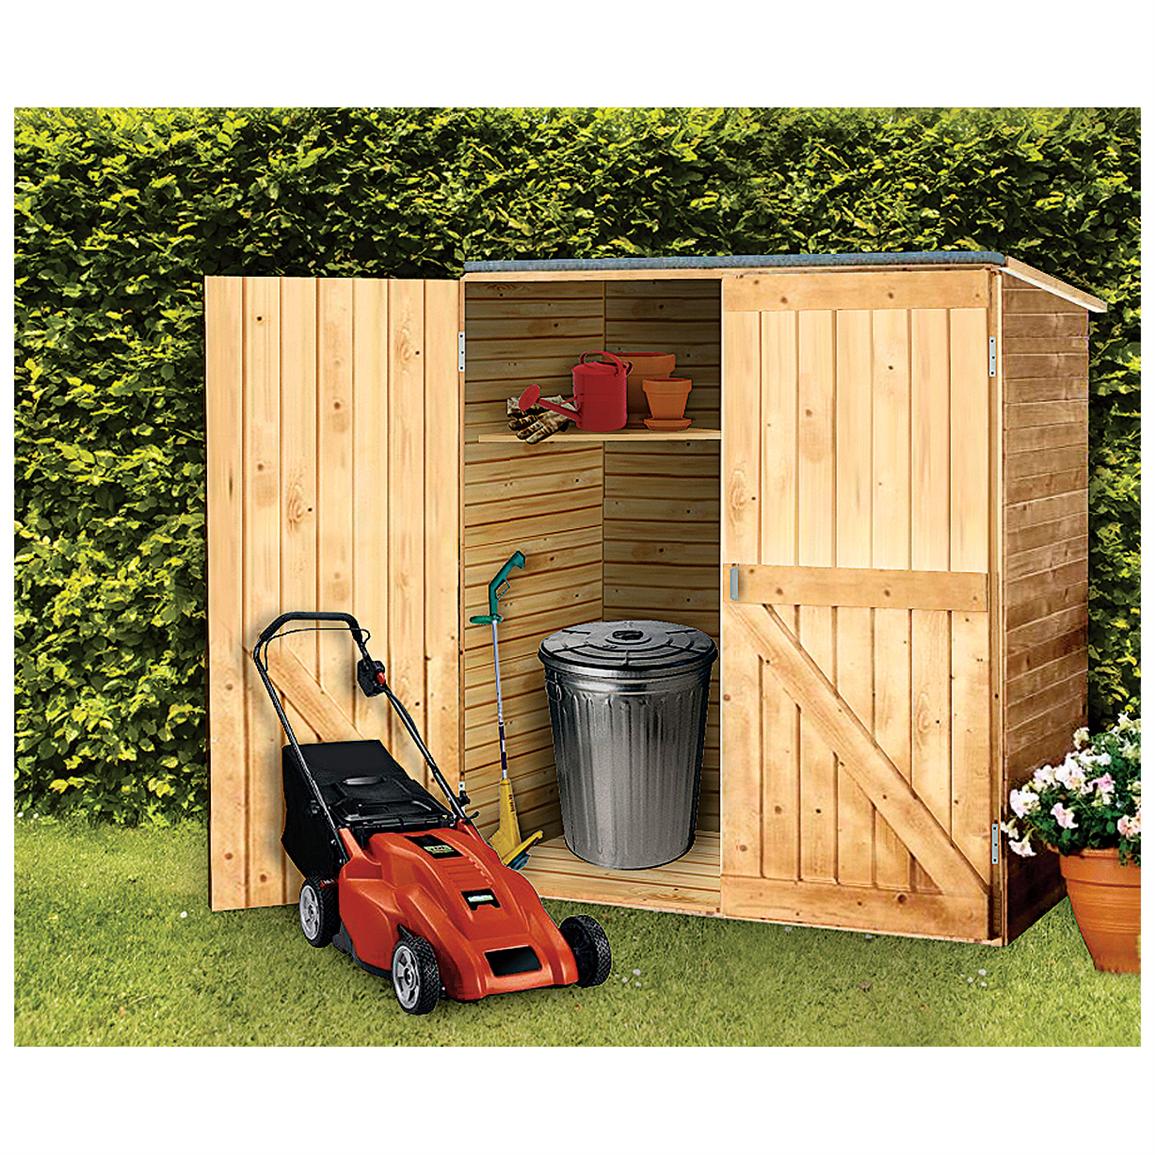 Solid Wood Outdoor Storage Shed - 236390, Patio Storage at Sportsman's ...